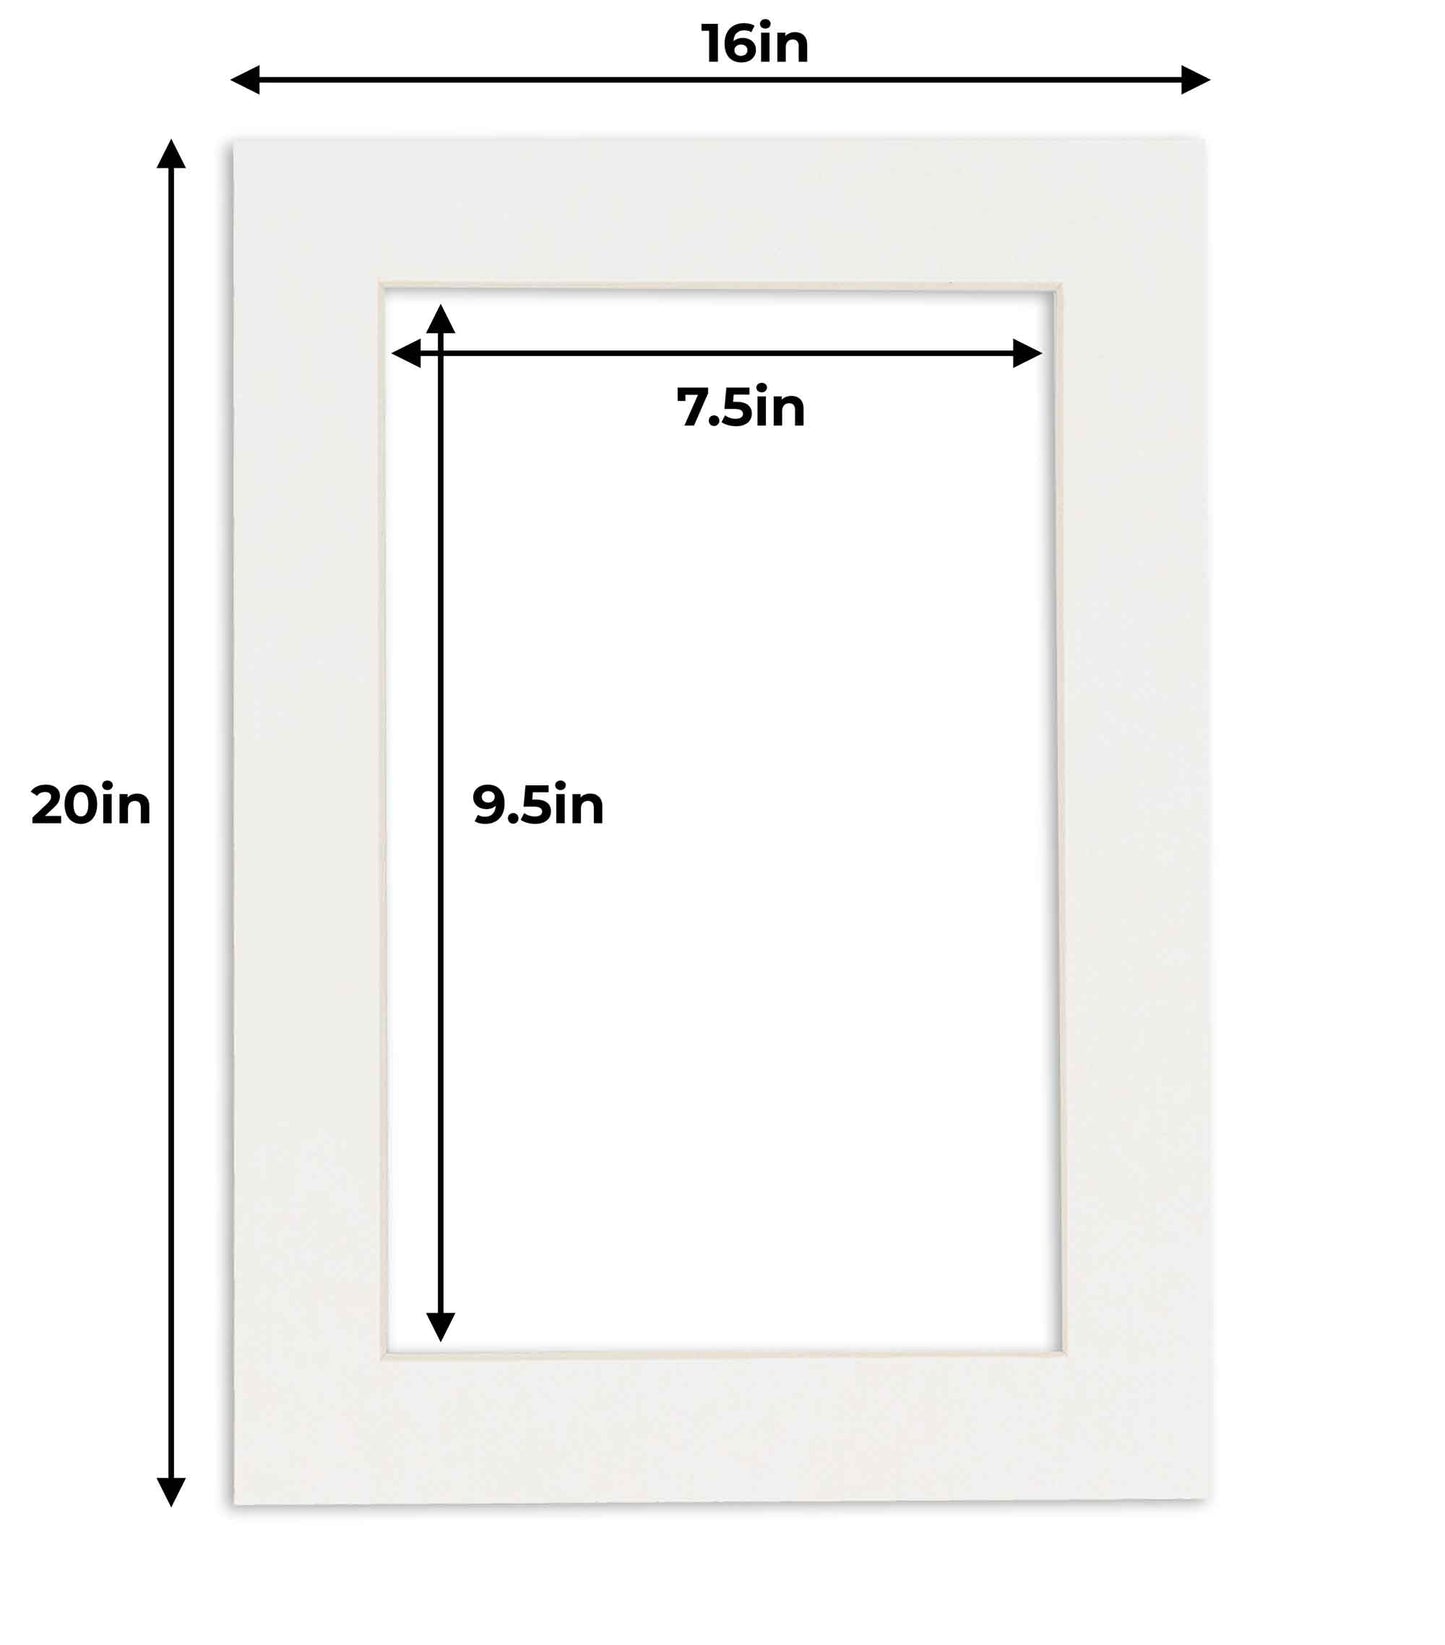 Pack of 10 Textured White Precut Acid-Free Matboards